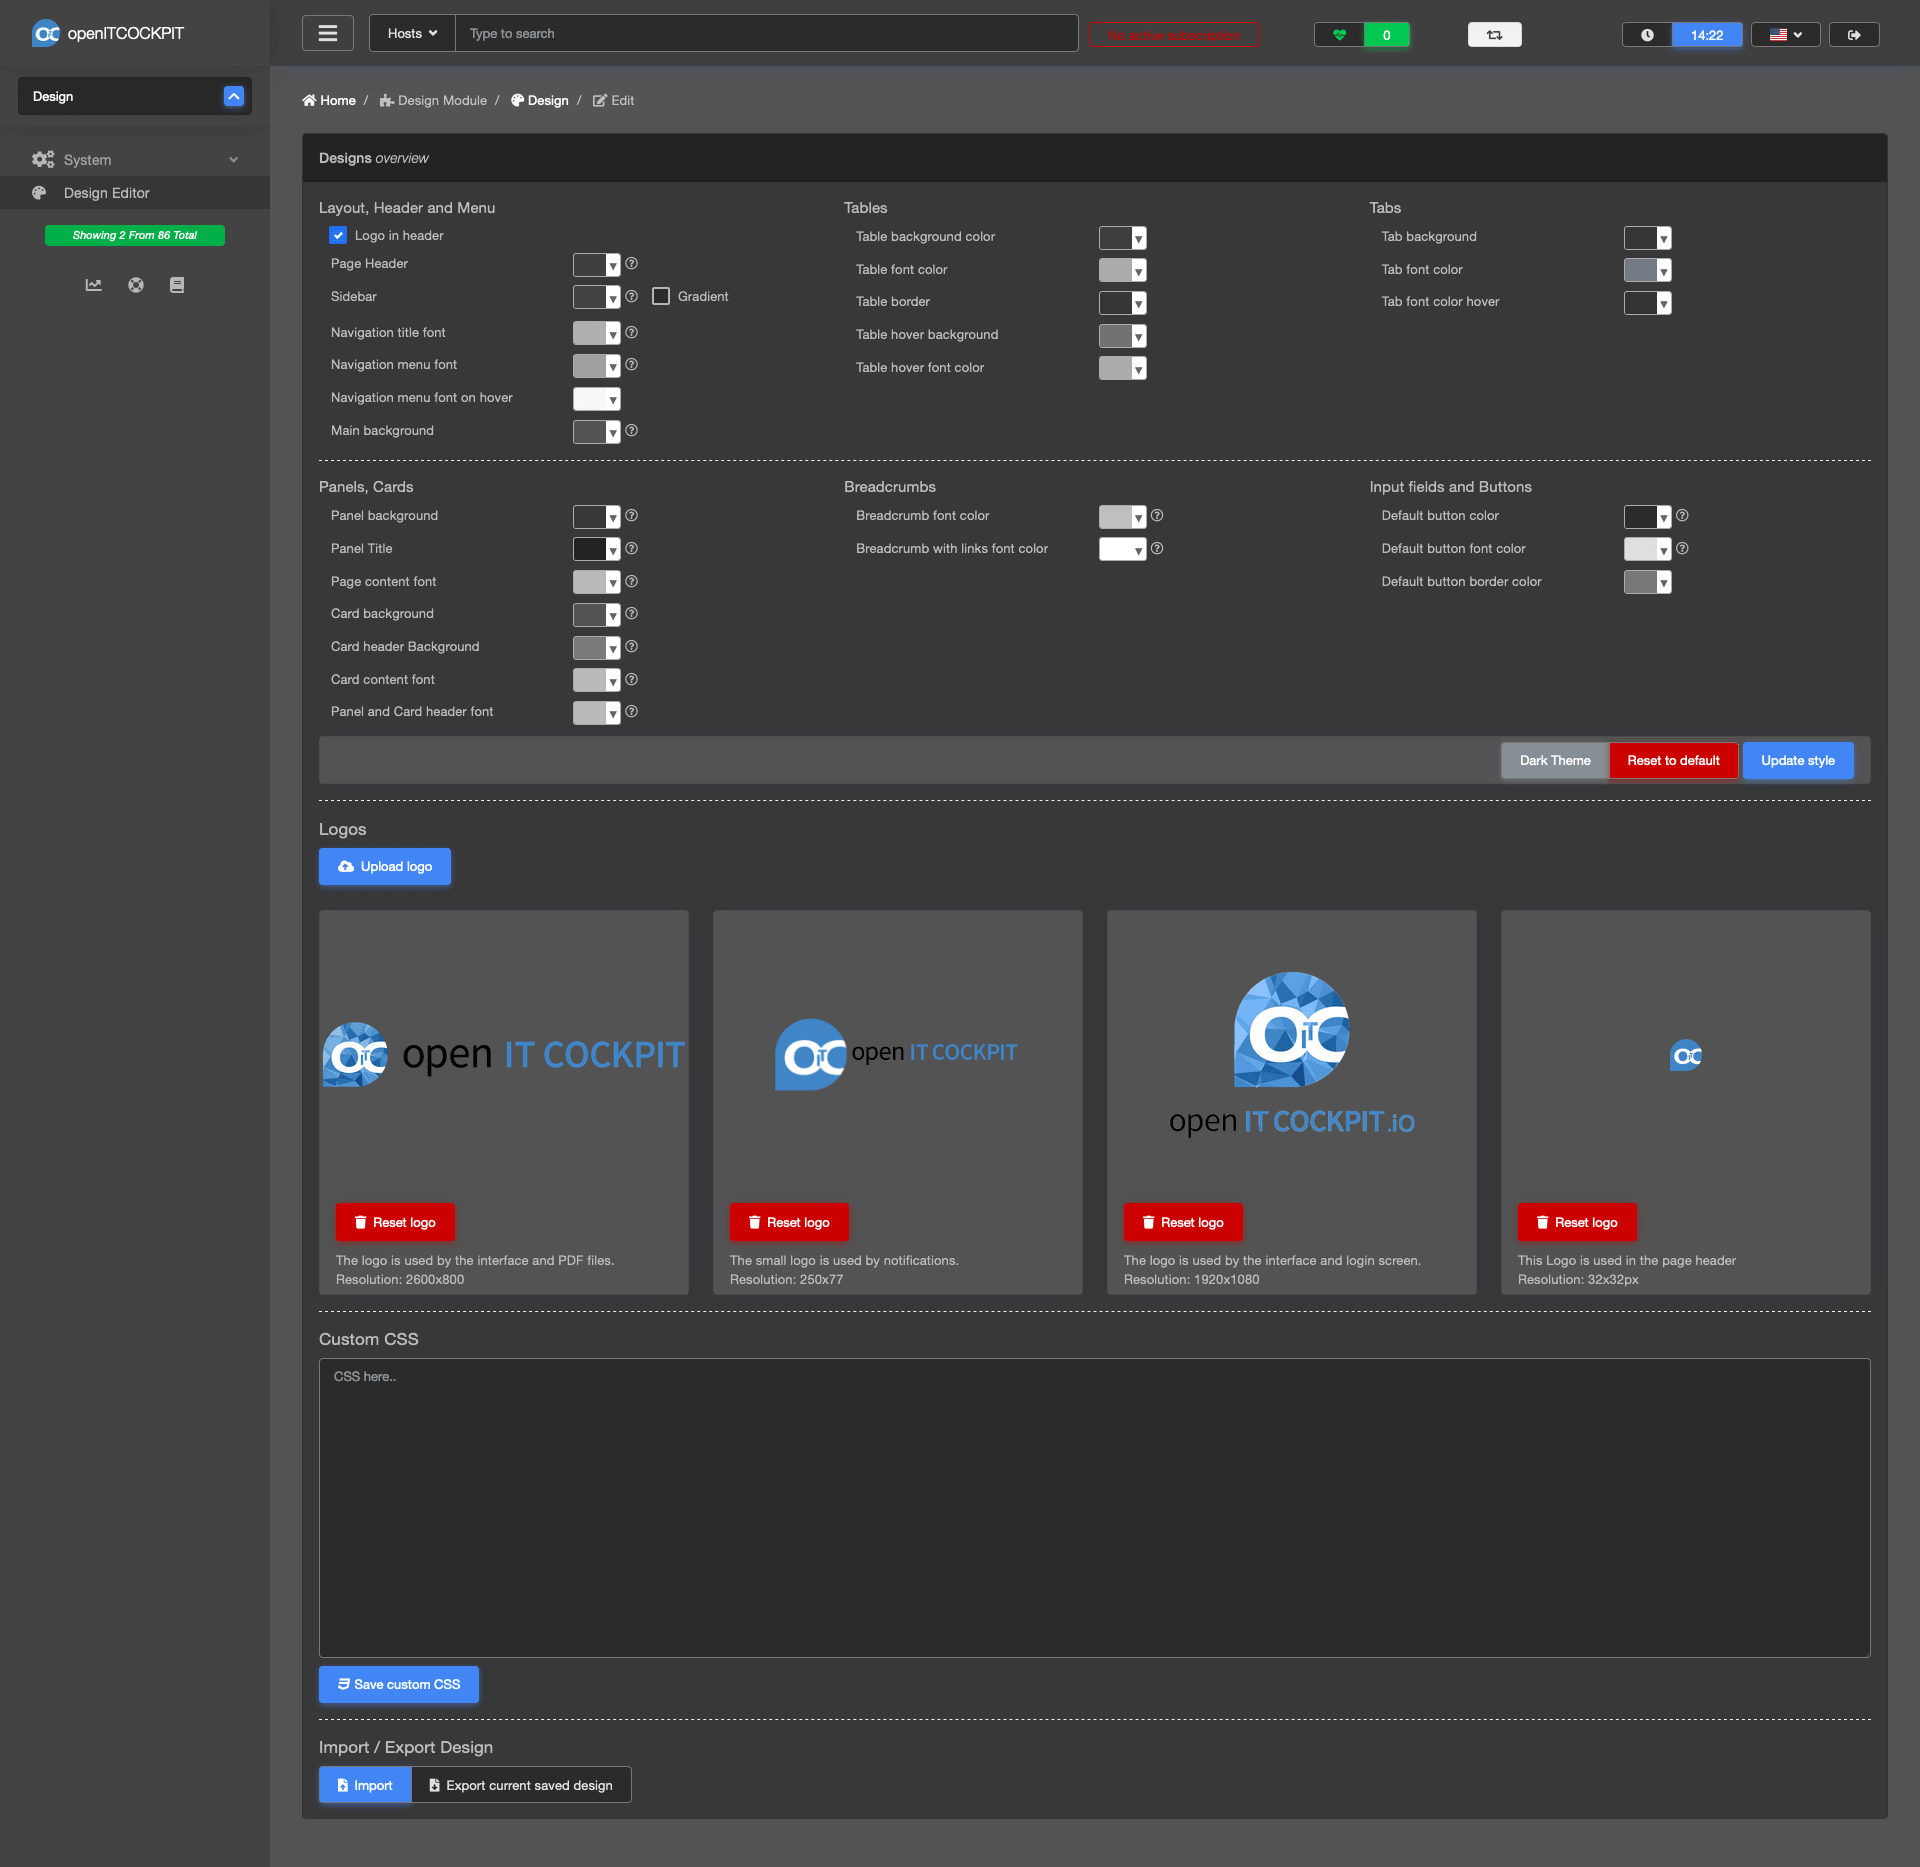 Change the colors and logos used by openITCOCKPIT within a few clicks. No programming required! Of course, it ships with a predefined dark mode.